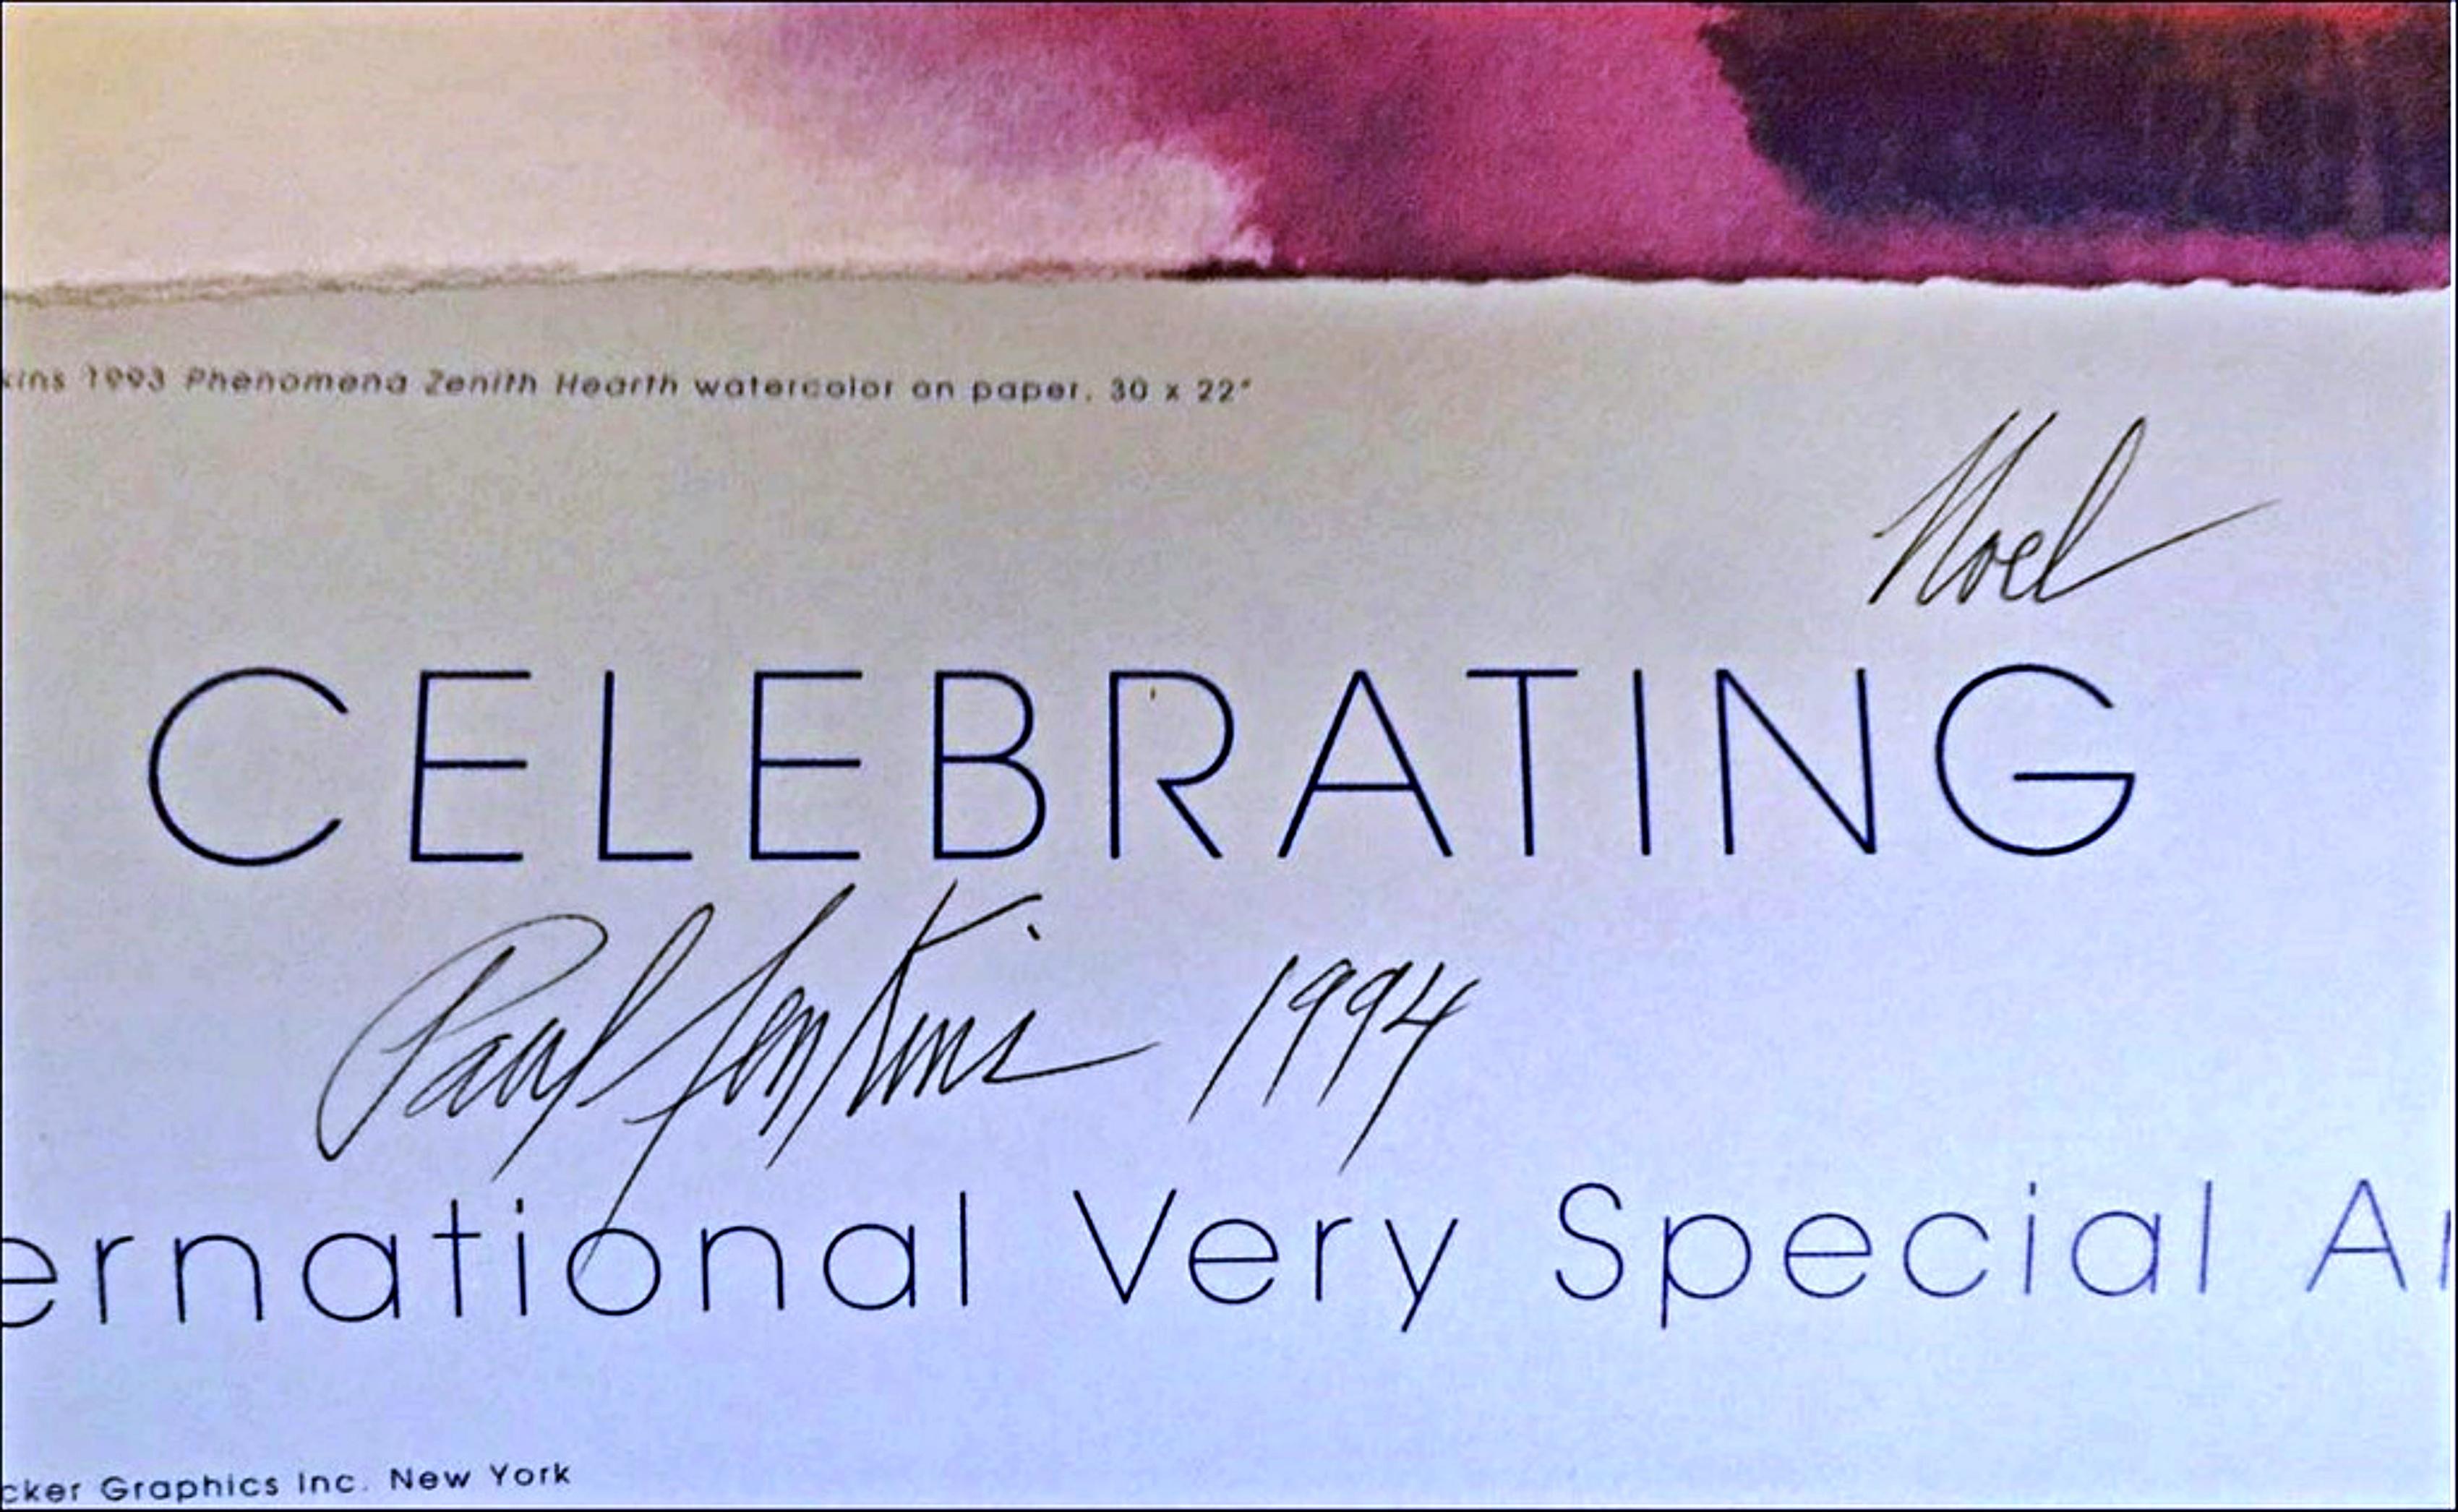 International Very Special Arts signed, inscribed Abstract Expressionist poster - Print by Paul Jenkins